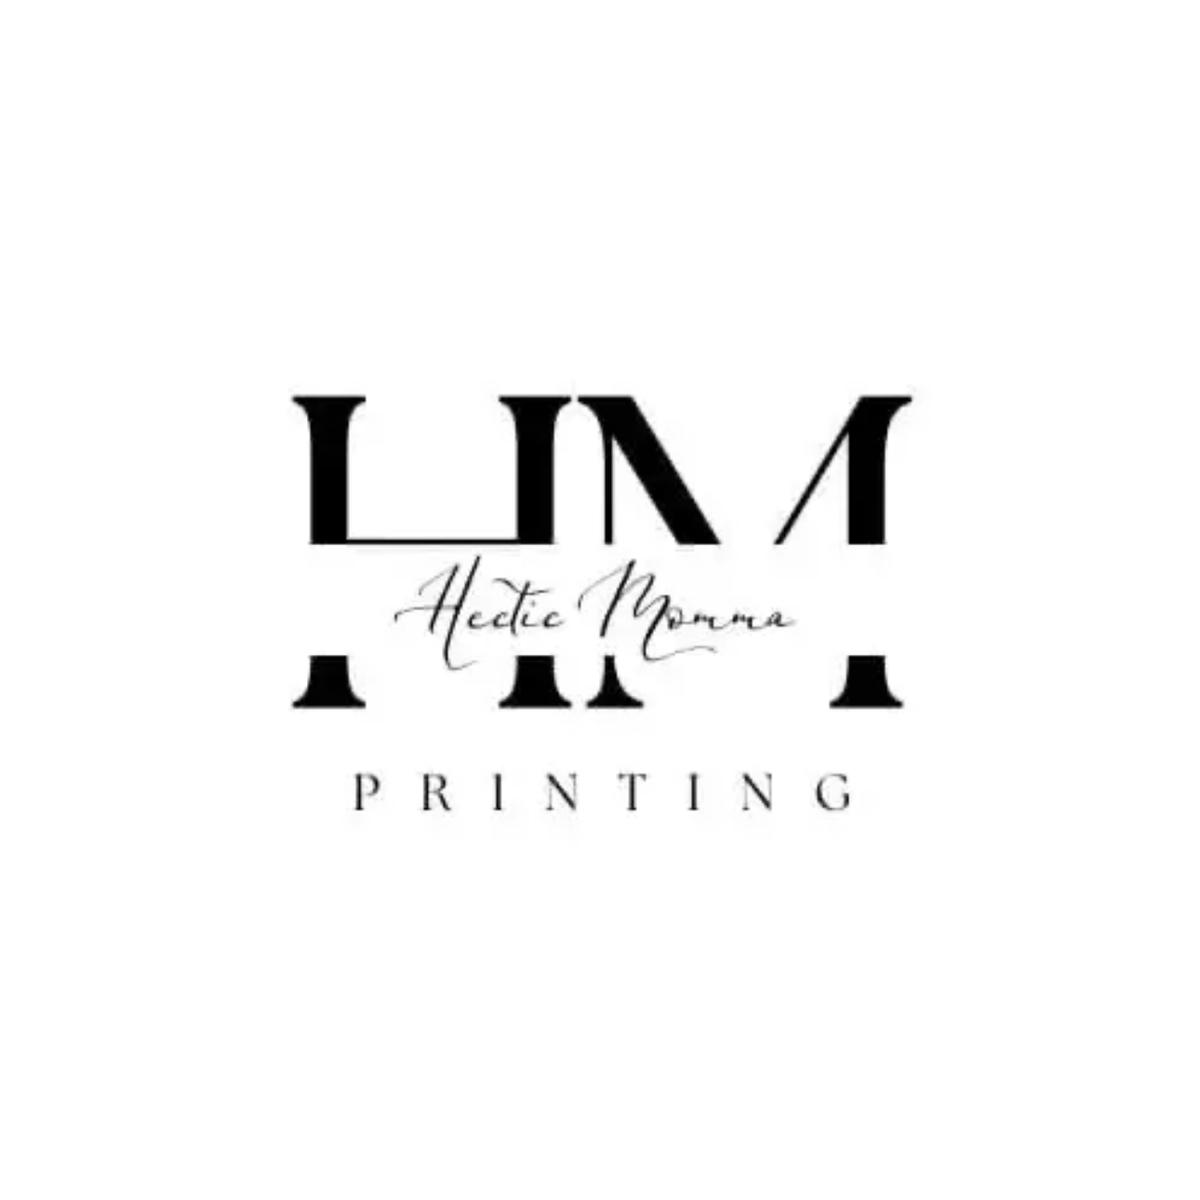 HecticPrinting's images